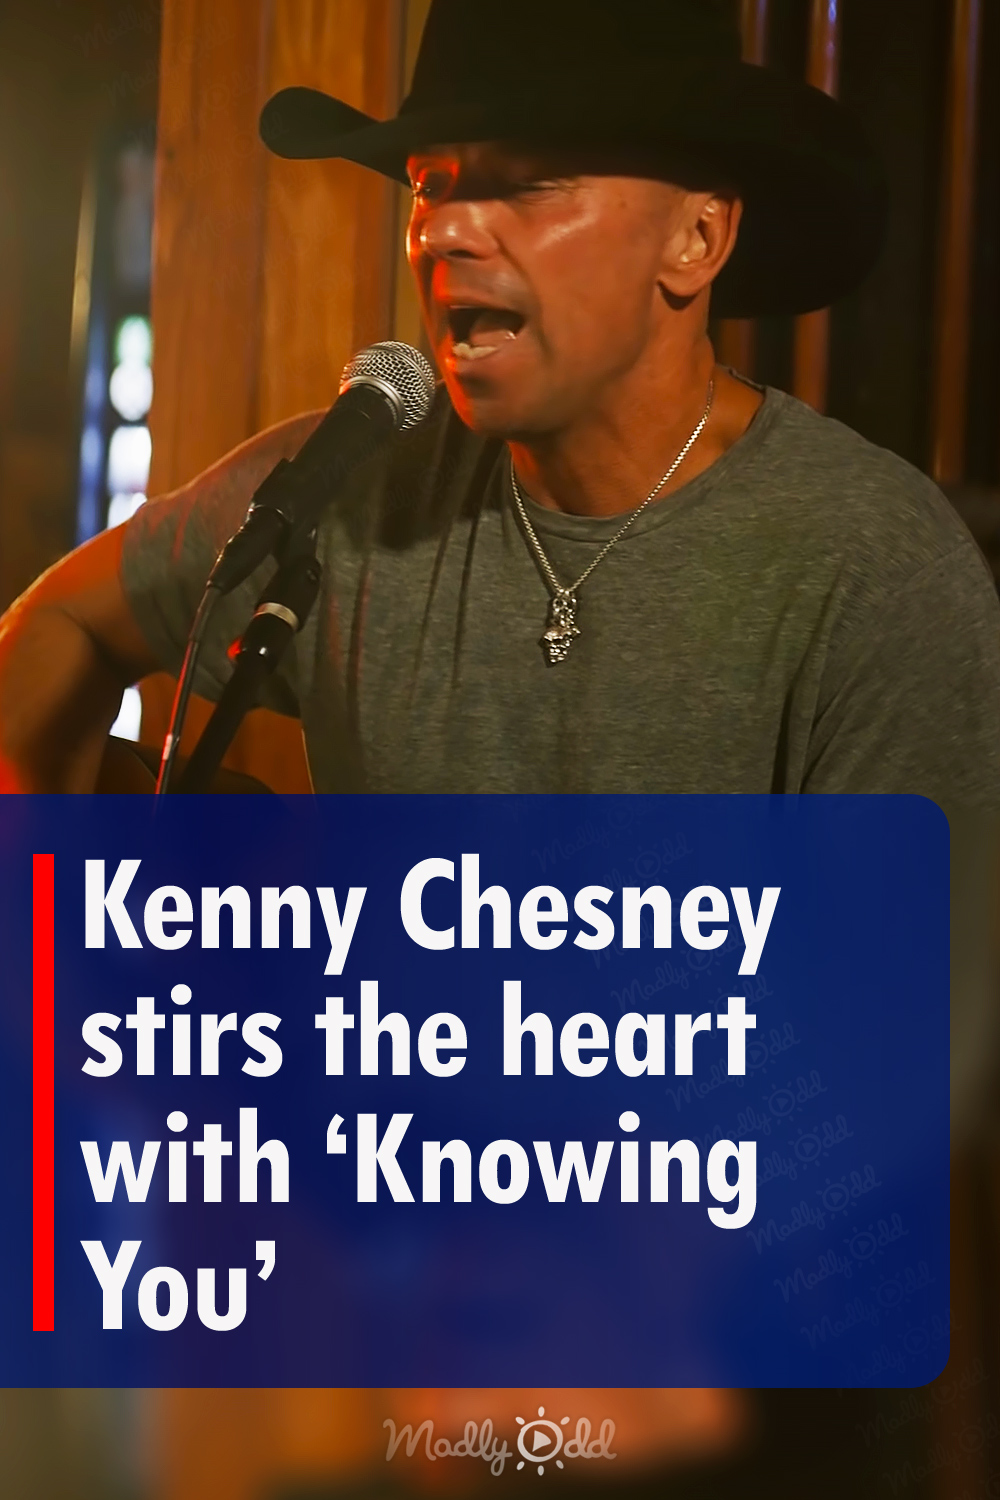 Kenny Chesney stirs the heart with ‘Knowing You’